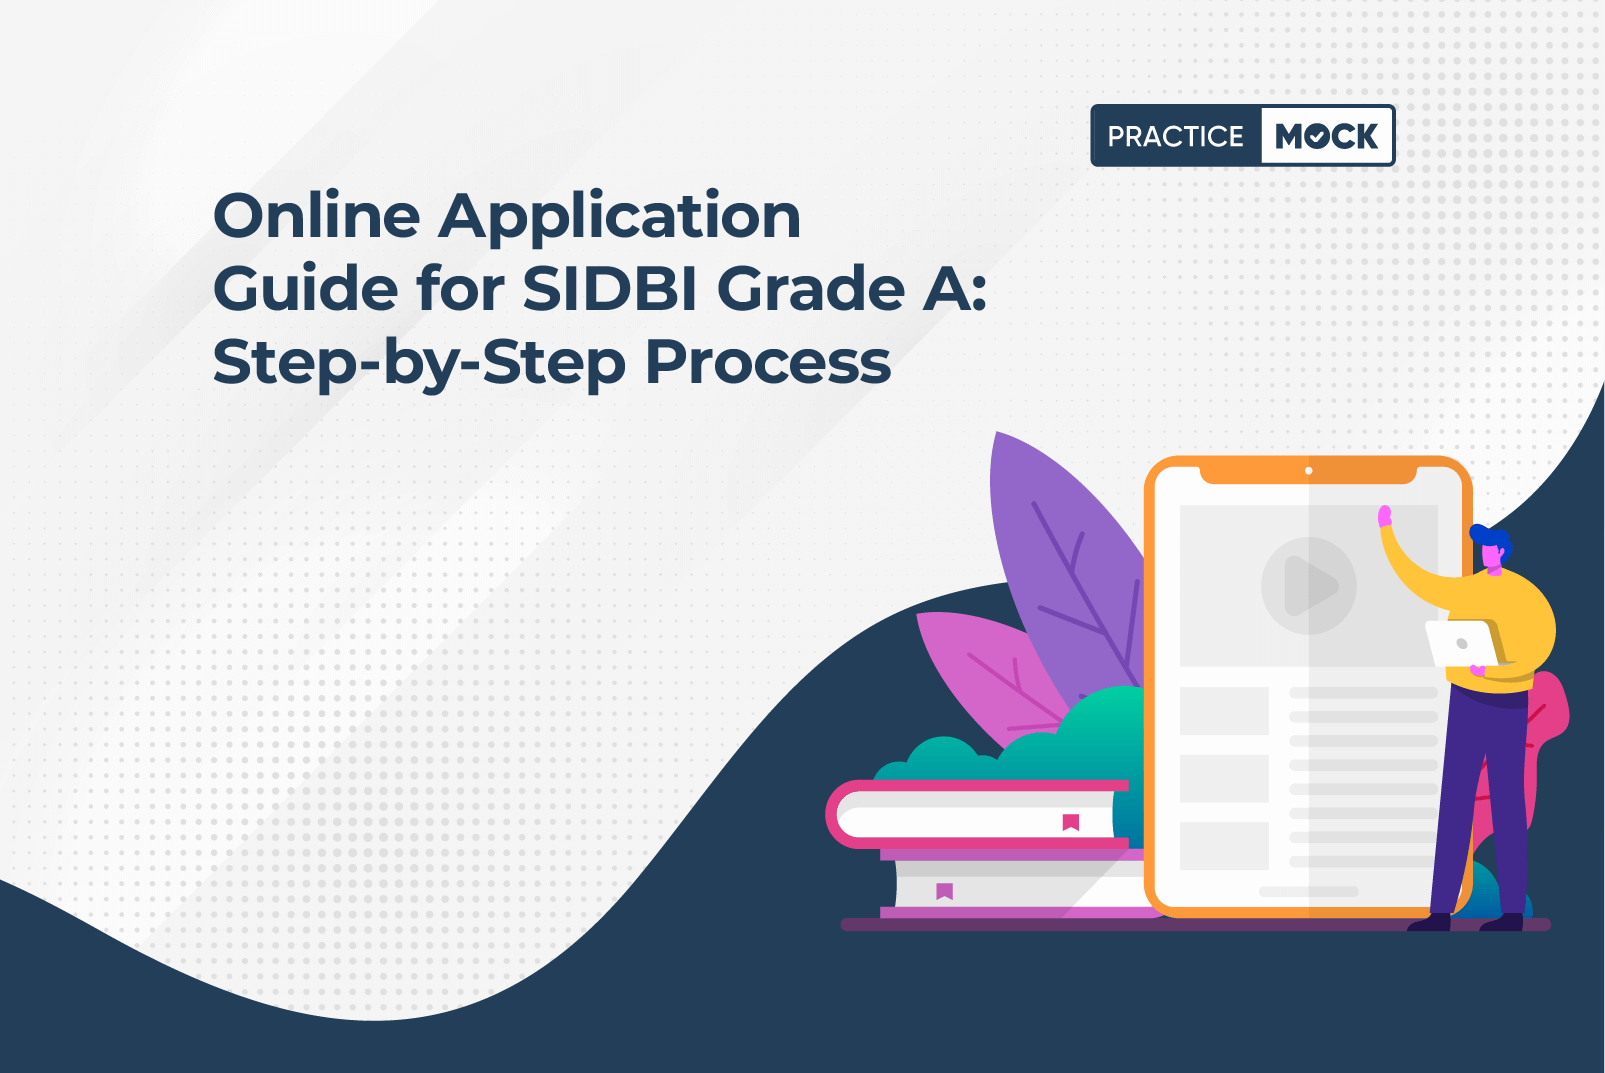 Online Application Guide for SIDBI Grade A: Step-by-Step Process